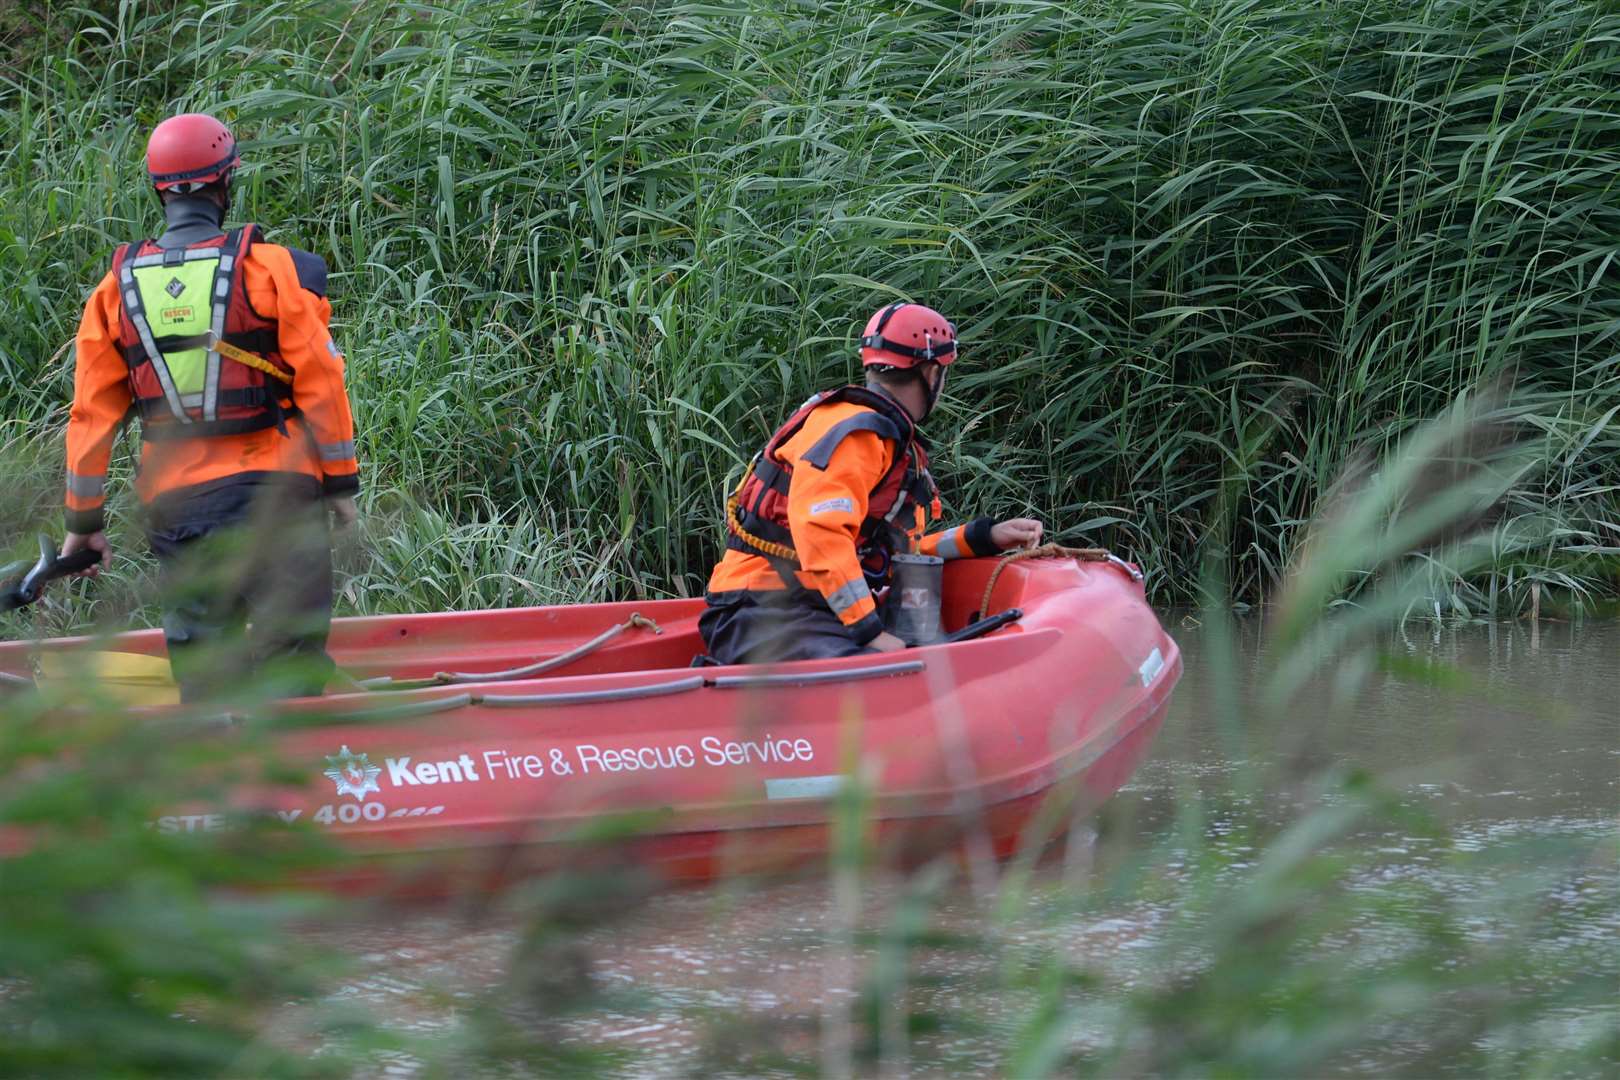 A Kent Fire and Rescue RIB joined the search of the River Stour at Sandwich for missing Lucas Dobson